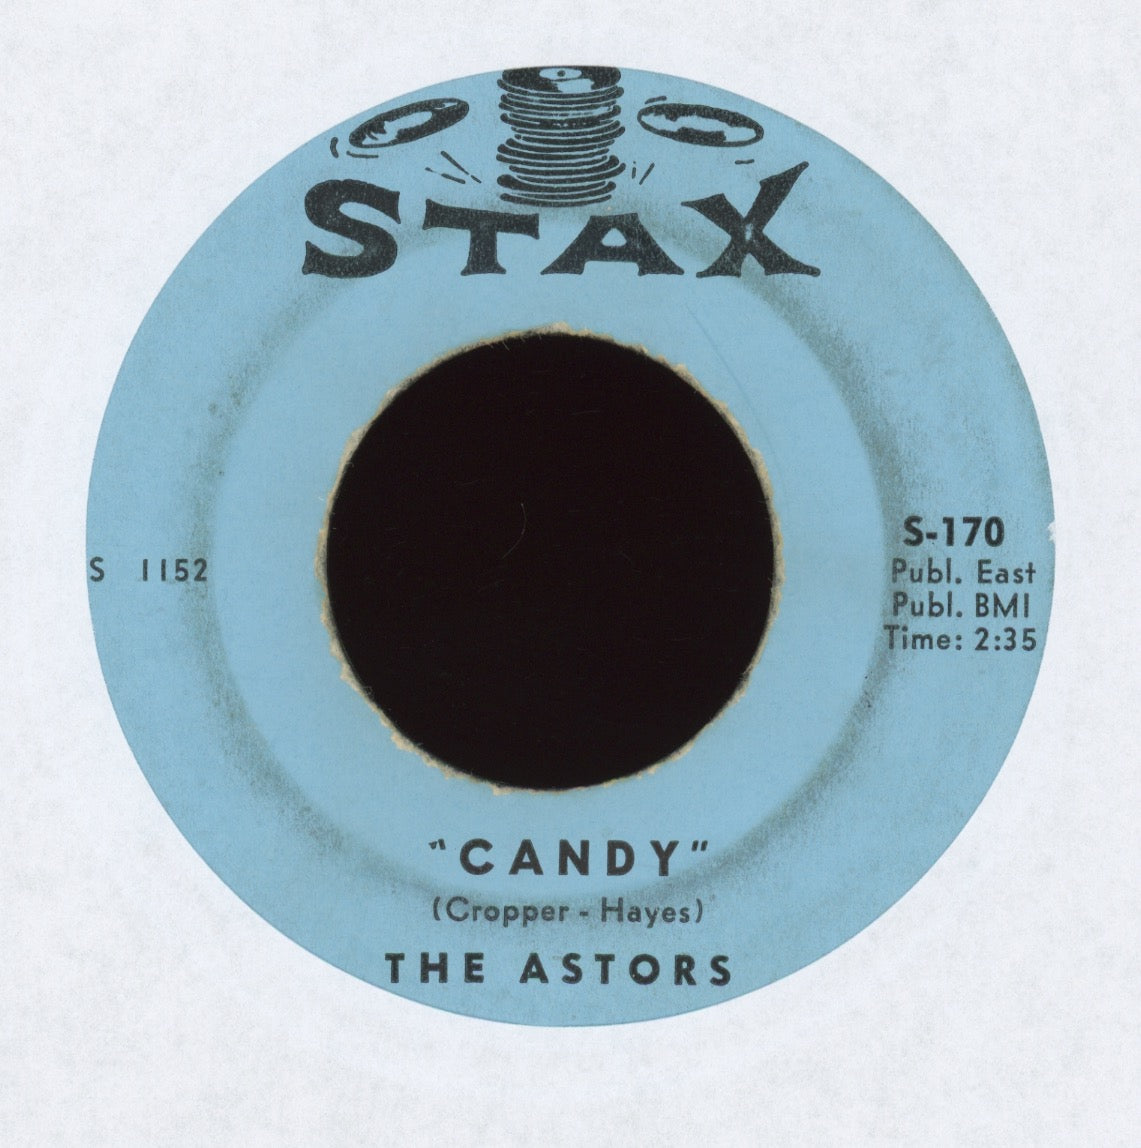 The Astors - Candy on Stax